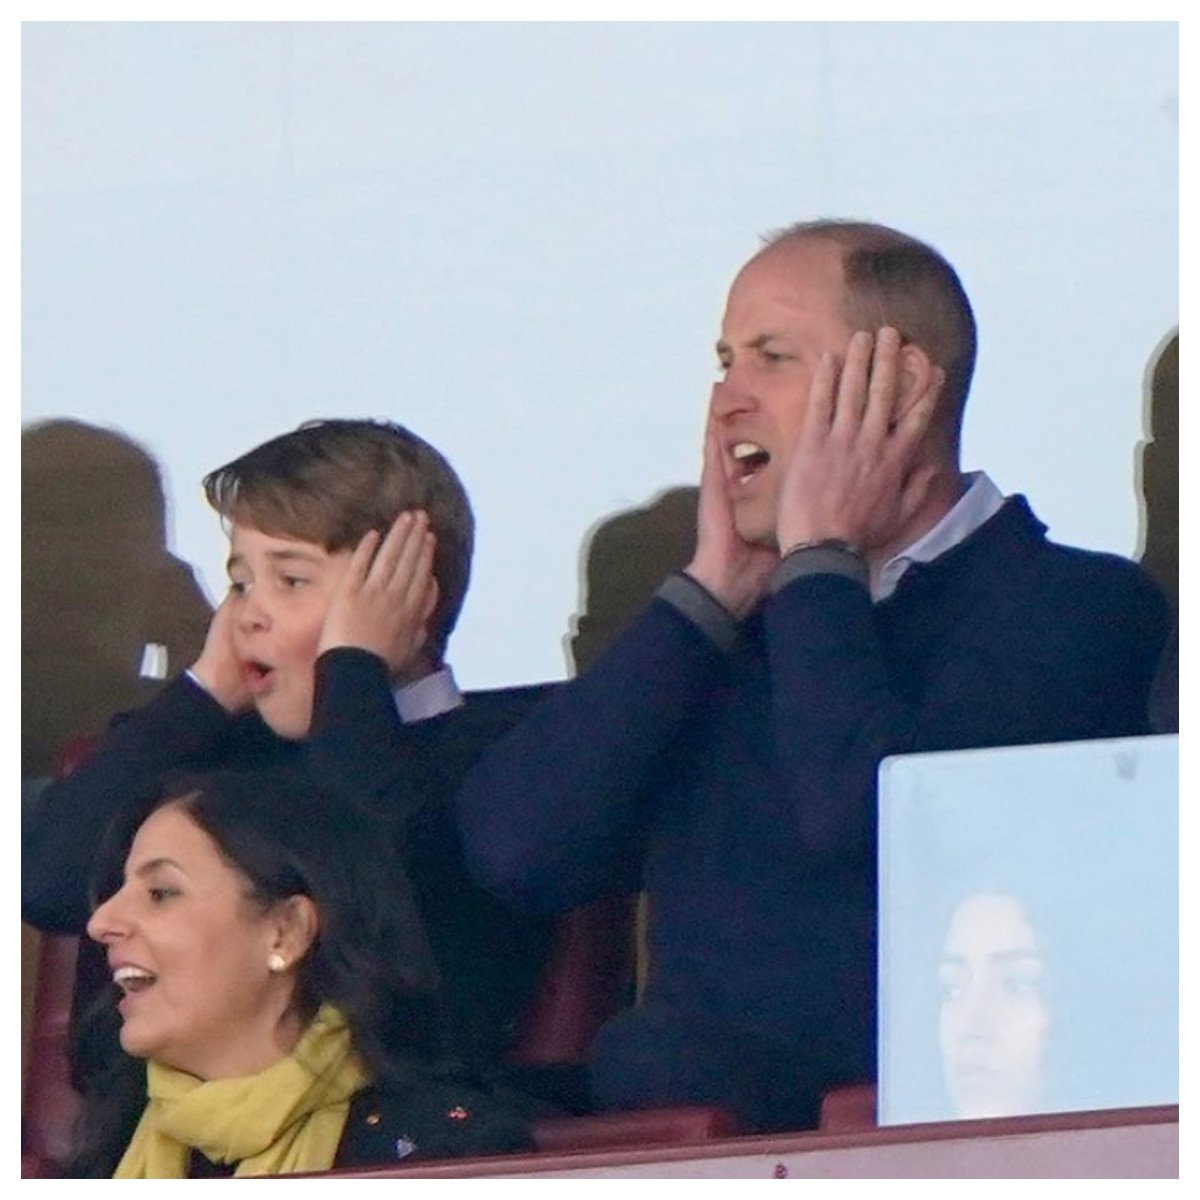 Prince George and Prince William delighted onlookers with their nearly identical mannerisms during an April Aston Villa game against Nottingham Forest. Photo: @jjgiddens/Instagram